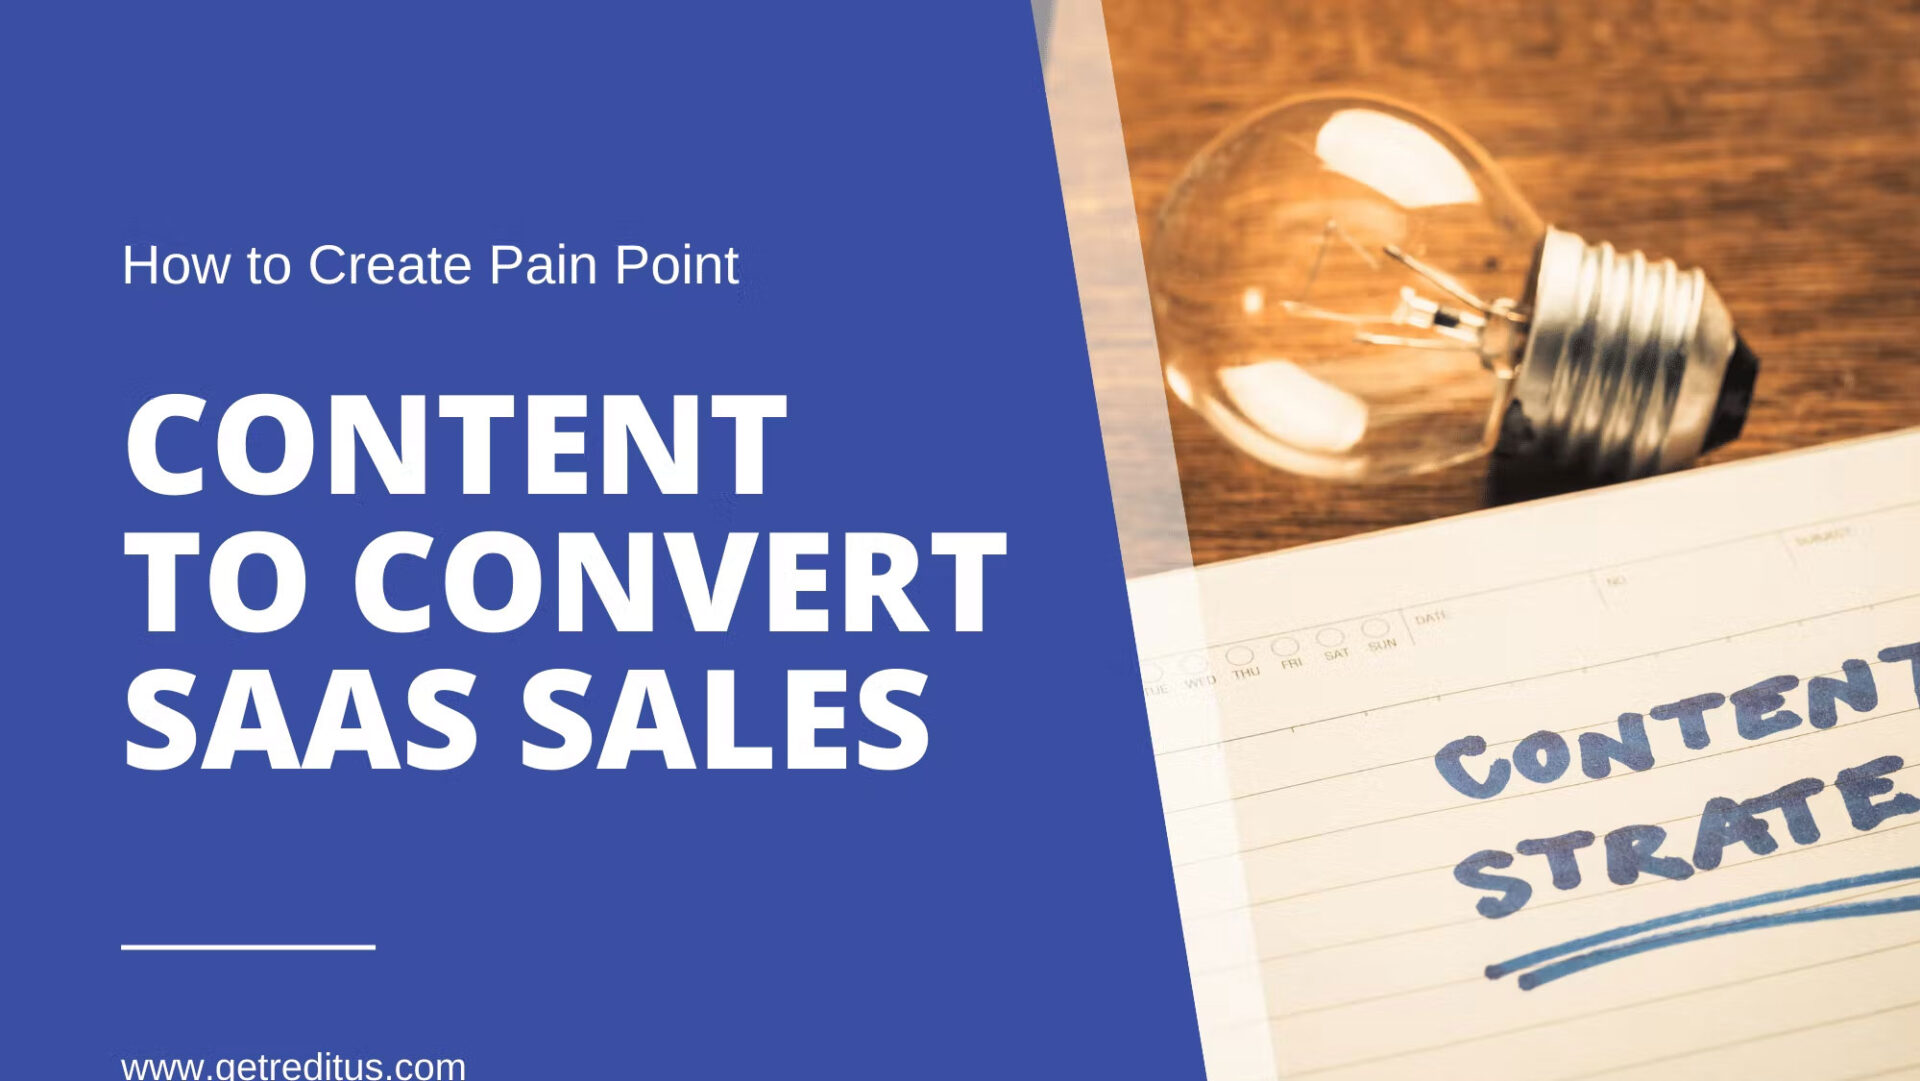 How to Create Pain Point Content to Convert SaaS Sales